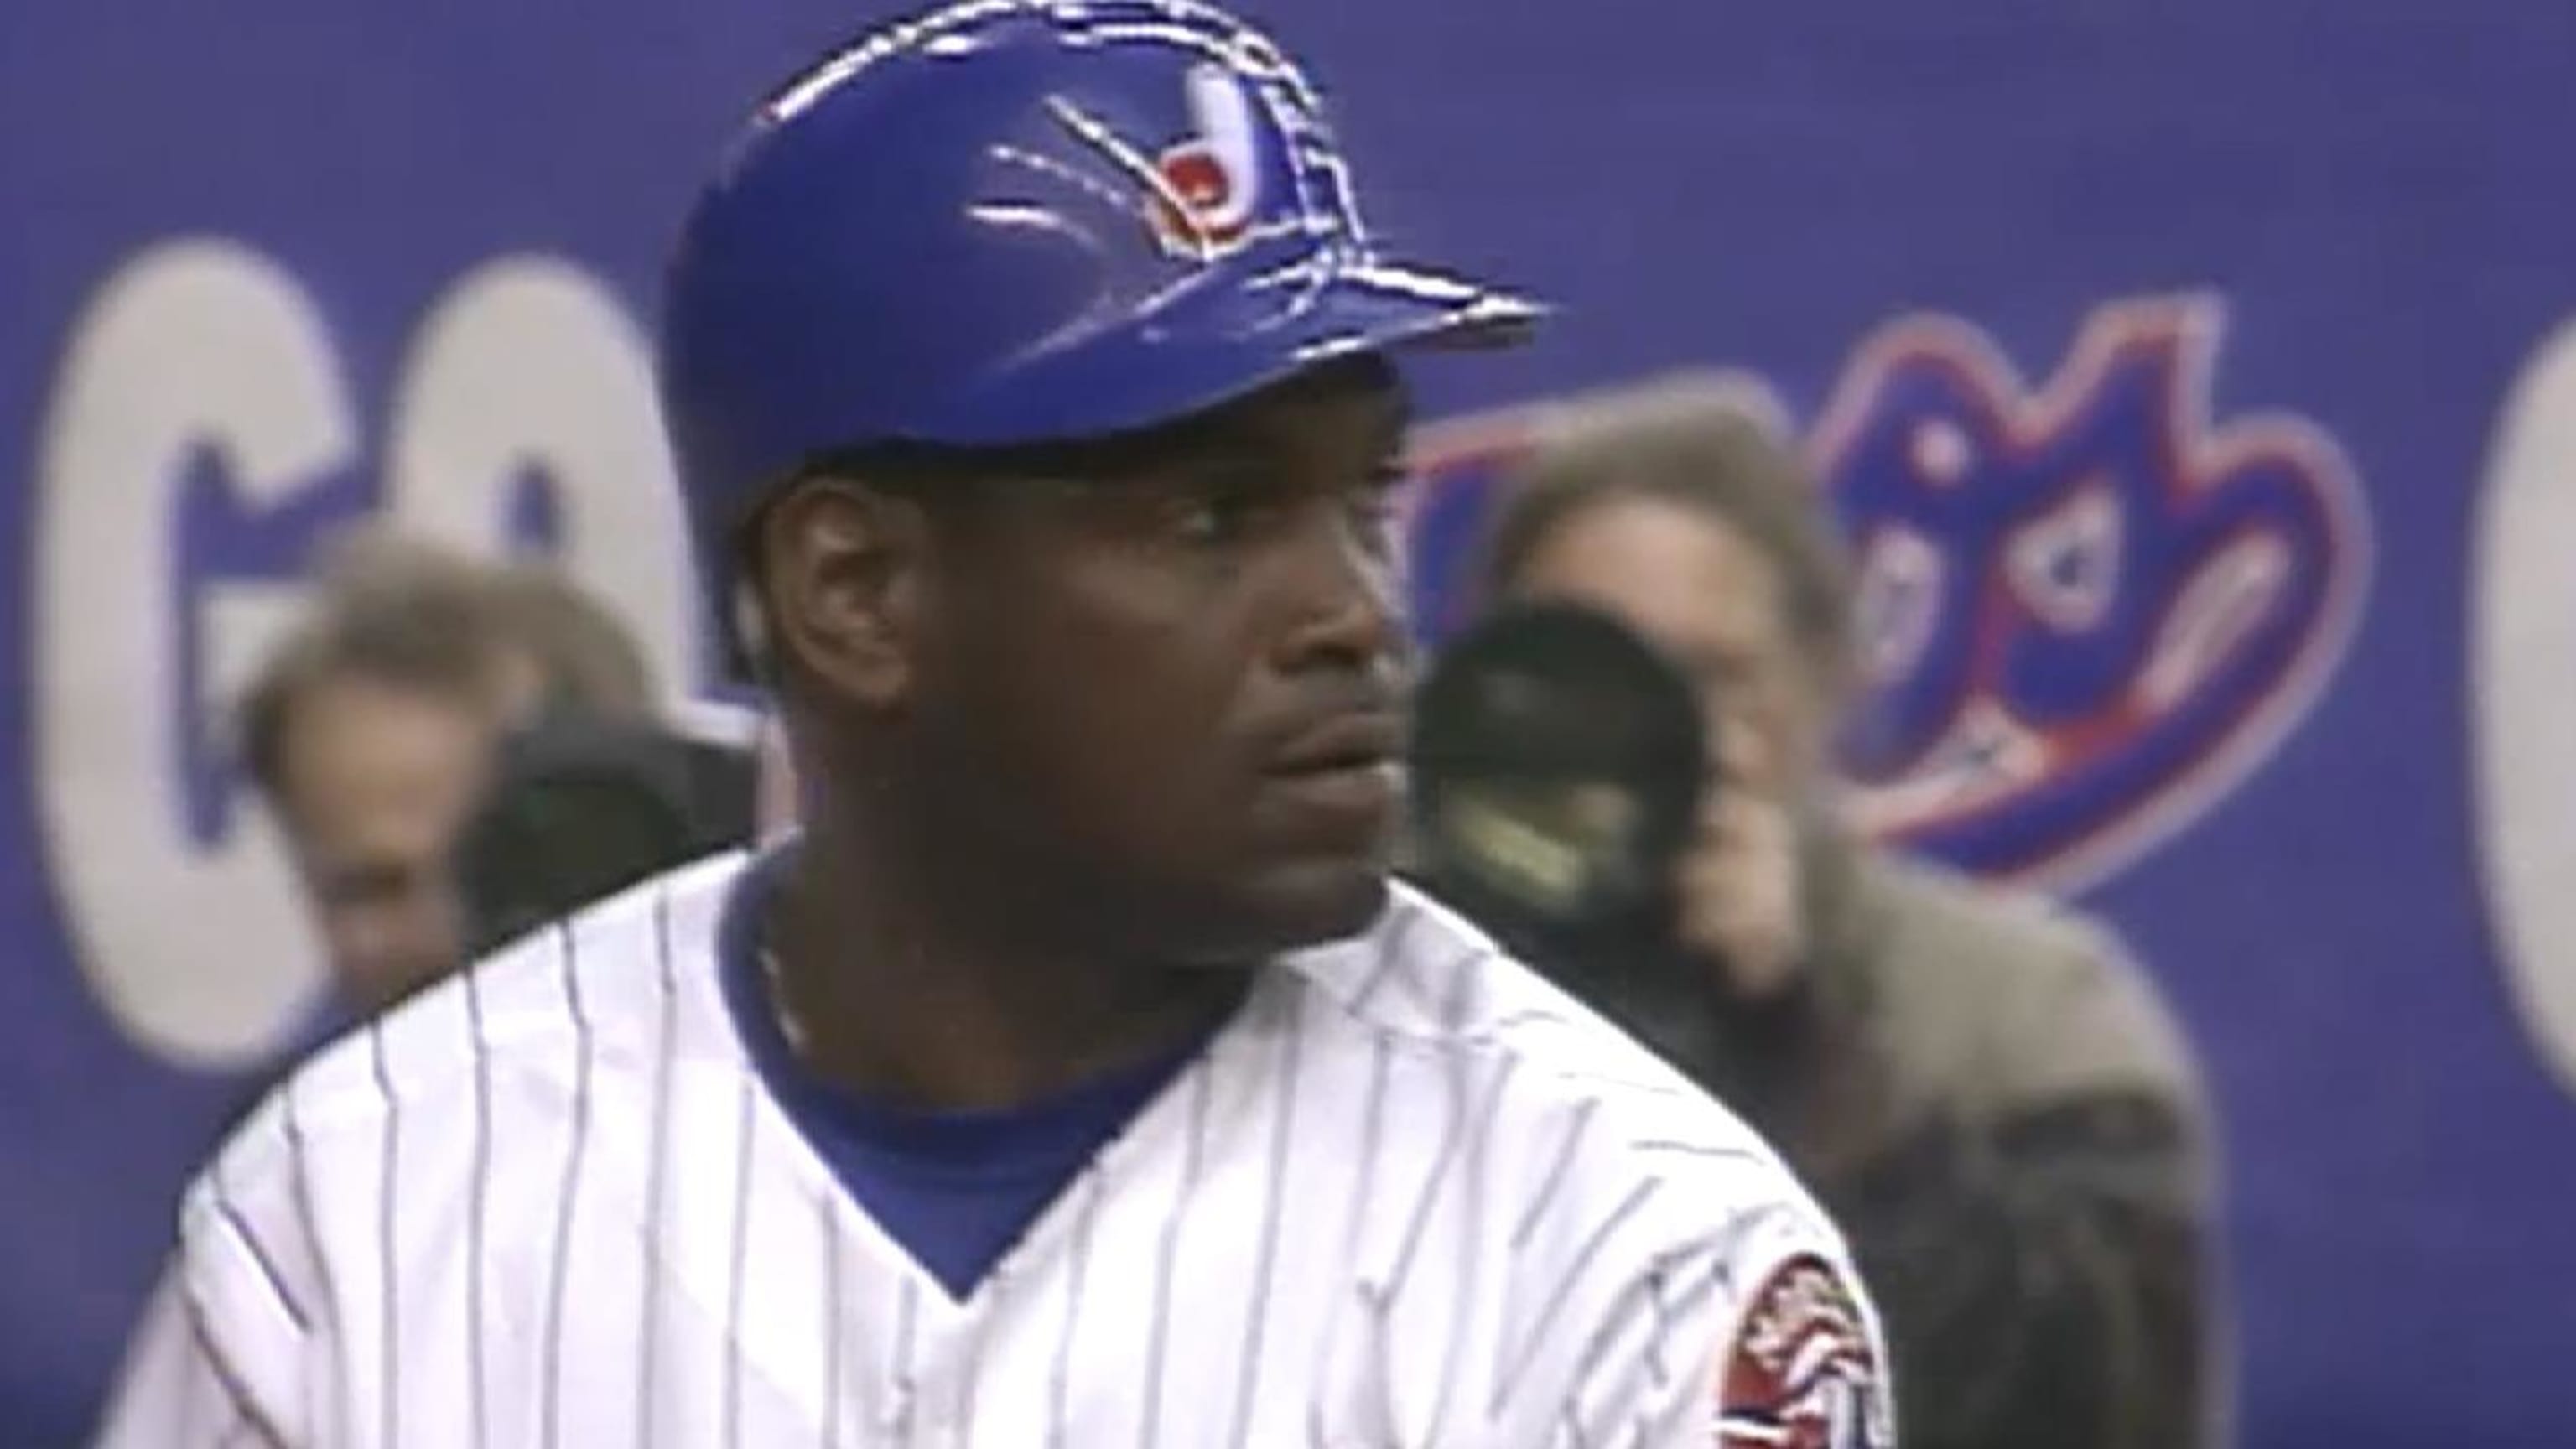 Tim Raines, Who Briefly Played With Orioles, Elected To